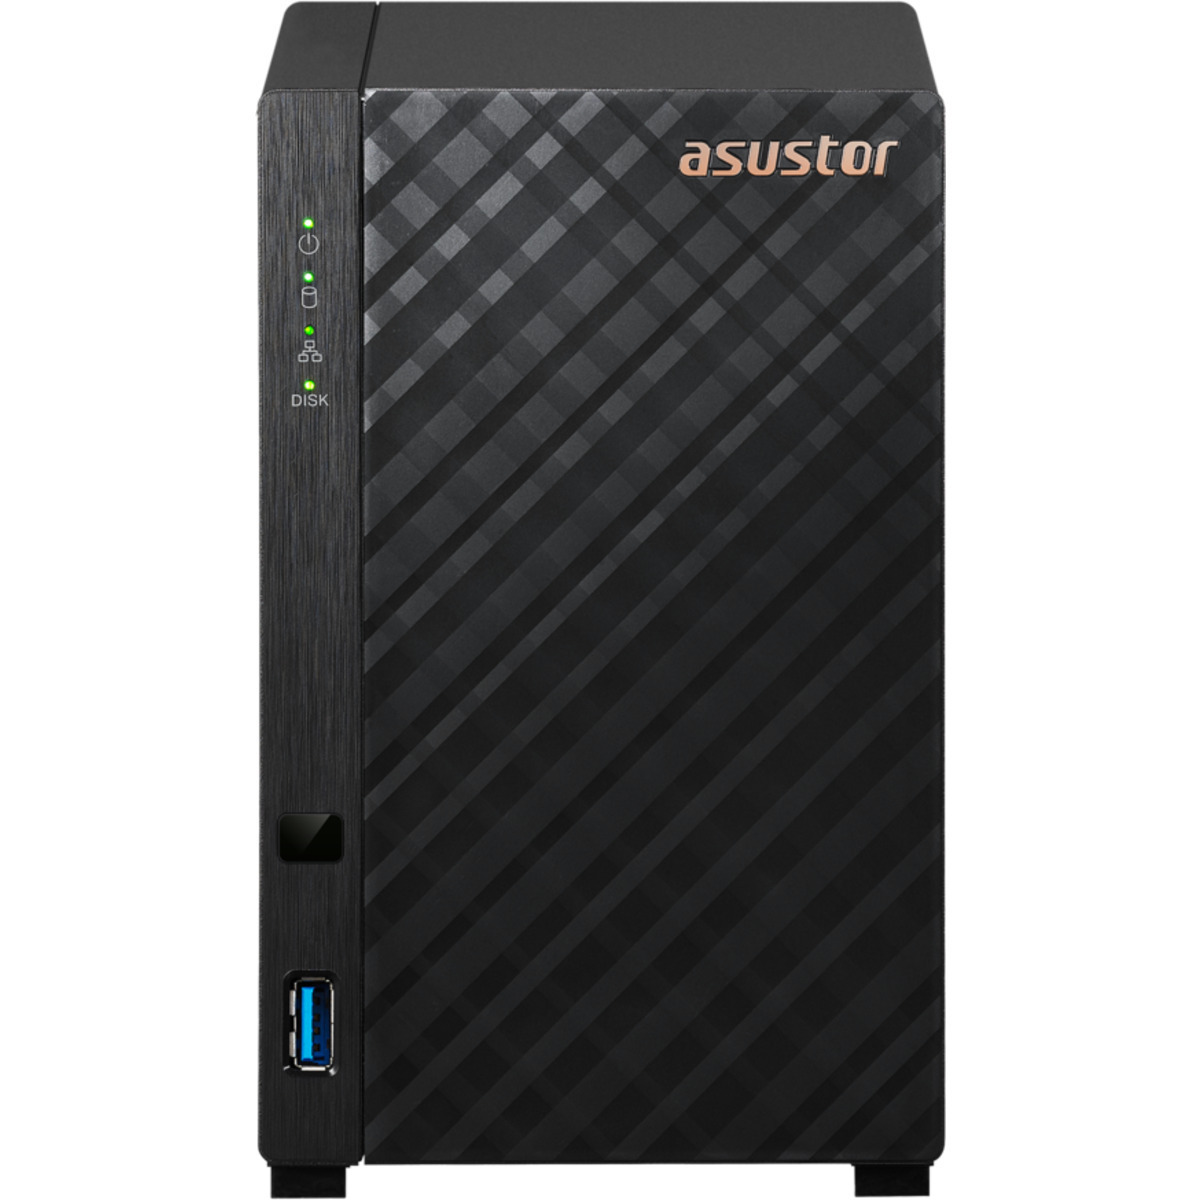 ASUSTOR DRIVESTOR 2 Lite AS1102TL 28tb 2-Bay Desktop Personal / Basic Home / Small Office NAS - Network Attached Storage Device 2x14tb Seagate IronWolf Pro ST14000NT001 3.5 7200rpm SATA 6Gb/s HDD NAS Class Drives Installed - Burn-In Tested DRIVESTOR 2 Lite AS1102TL